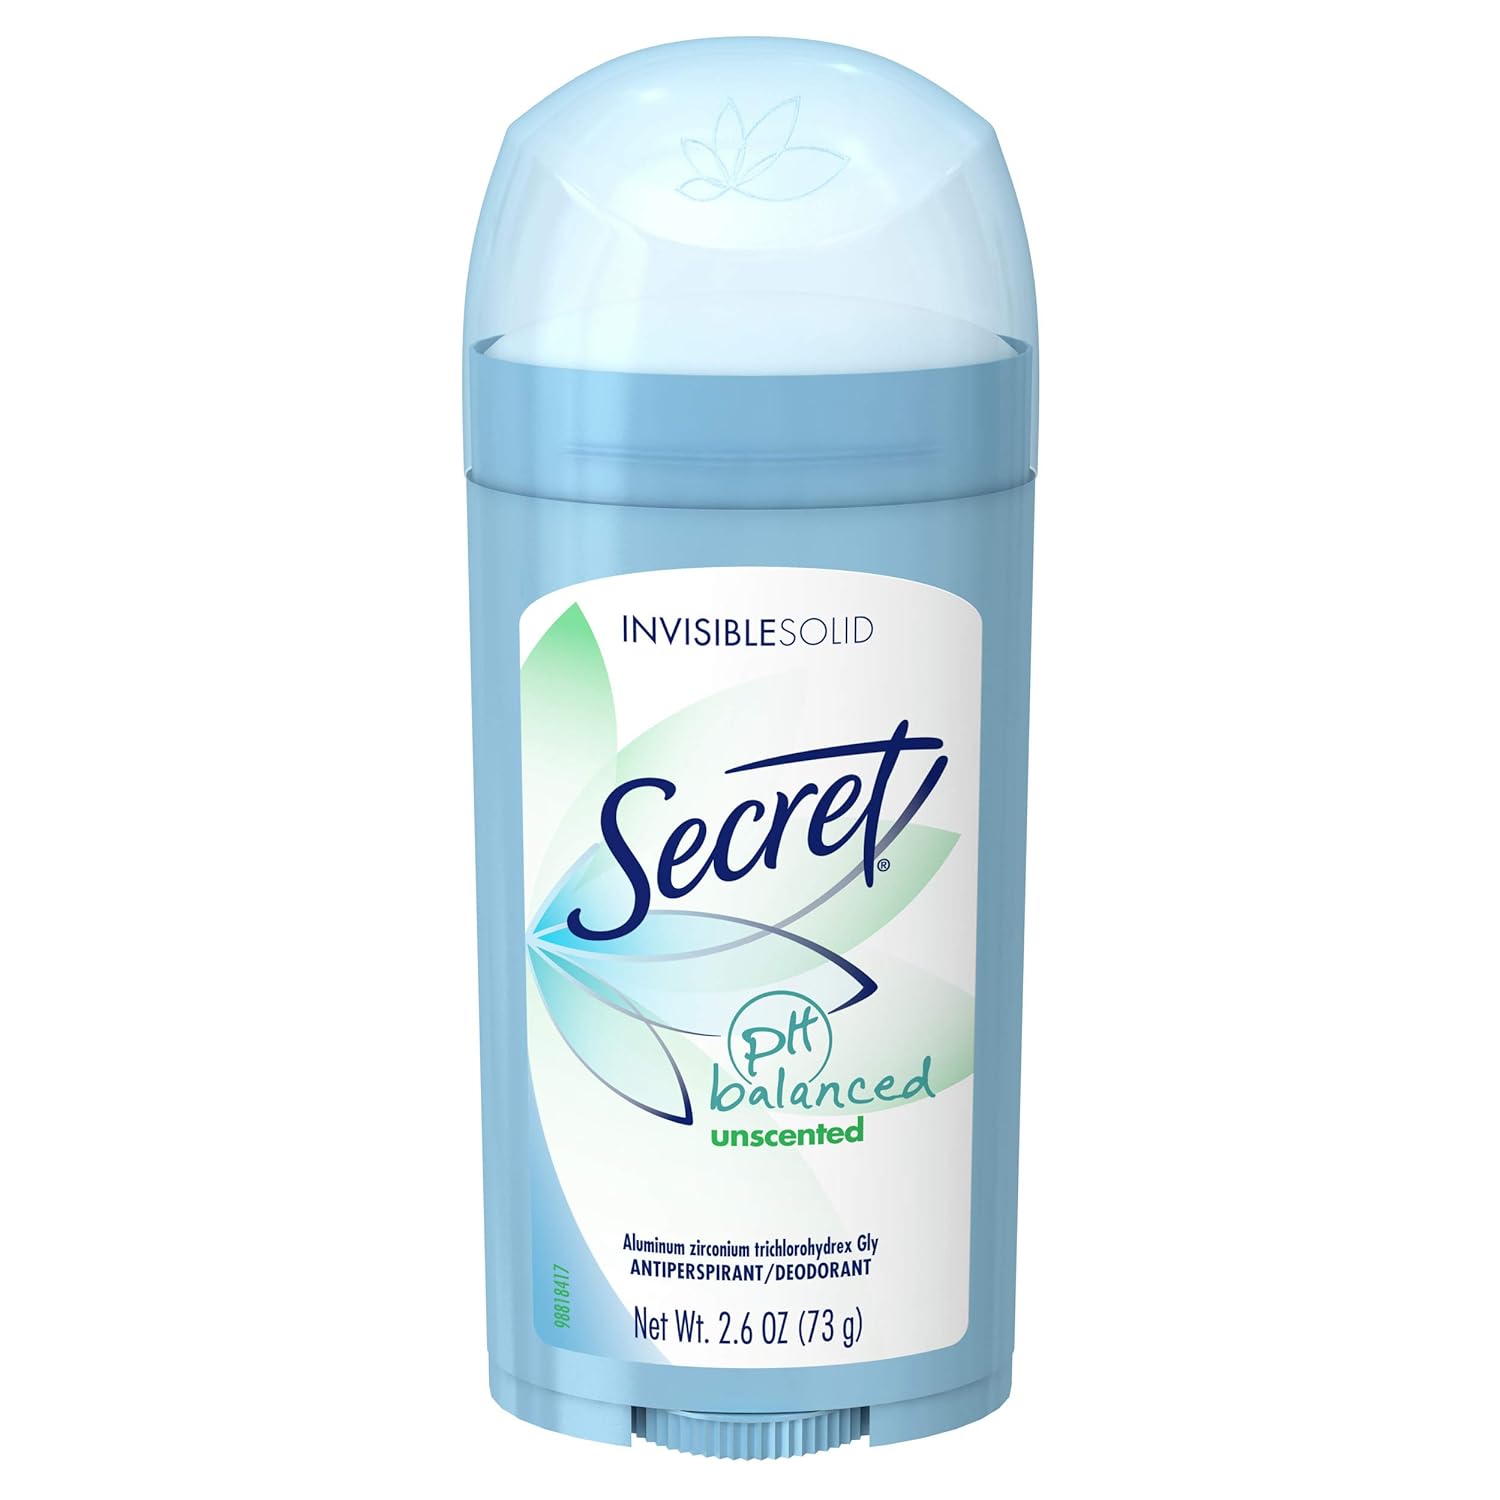  Secret Antiperspirant and Deodorant for Women, Original Unscented, Invisible Solid, pH Balanced, 2.6 Oz (Pack of 6)